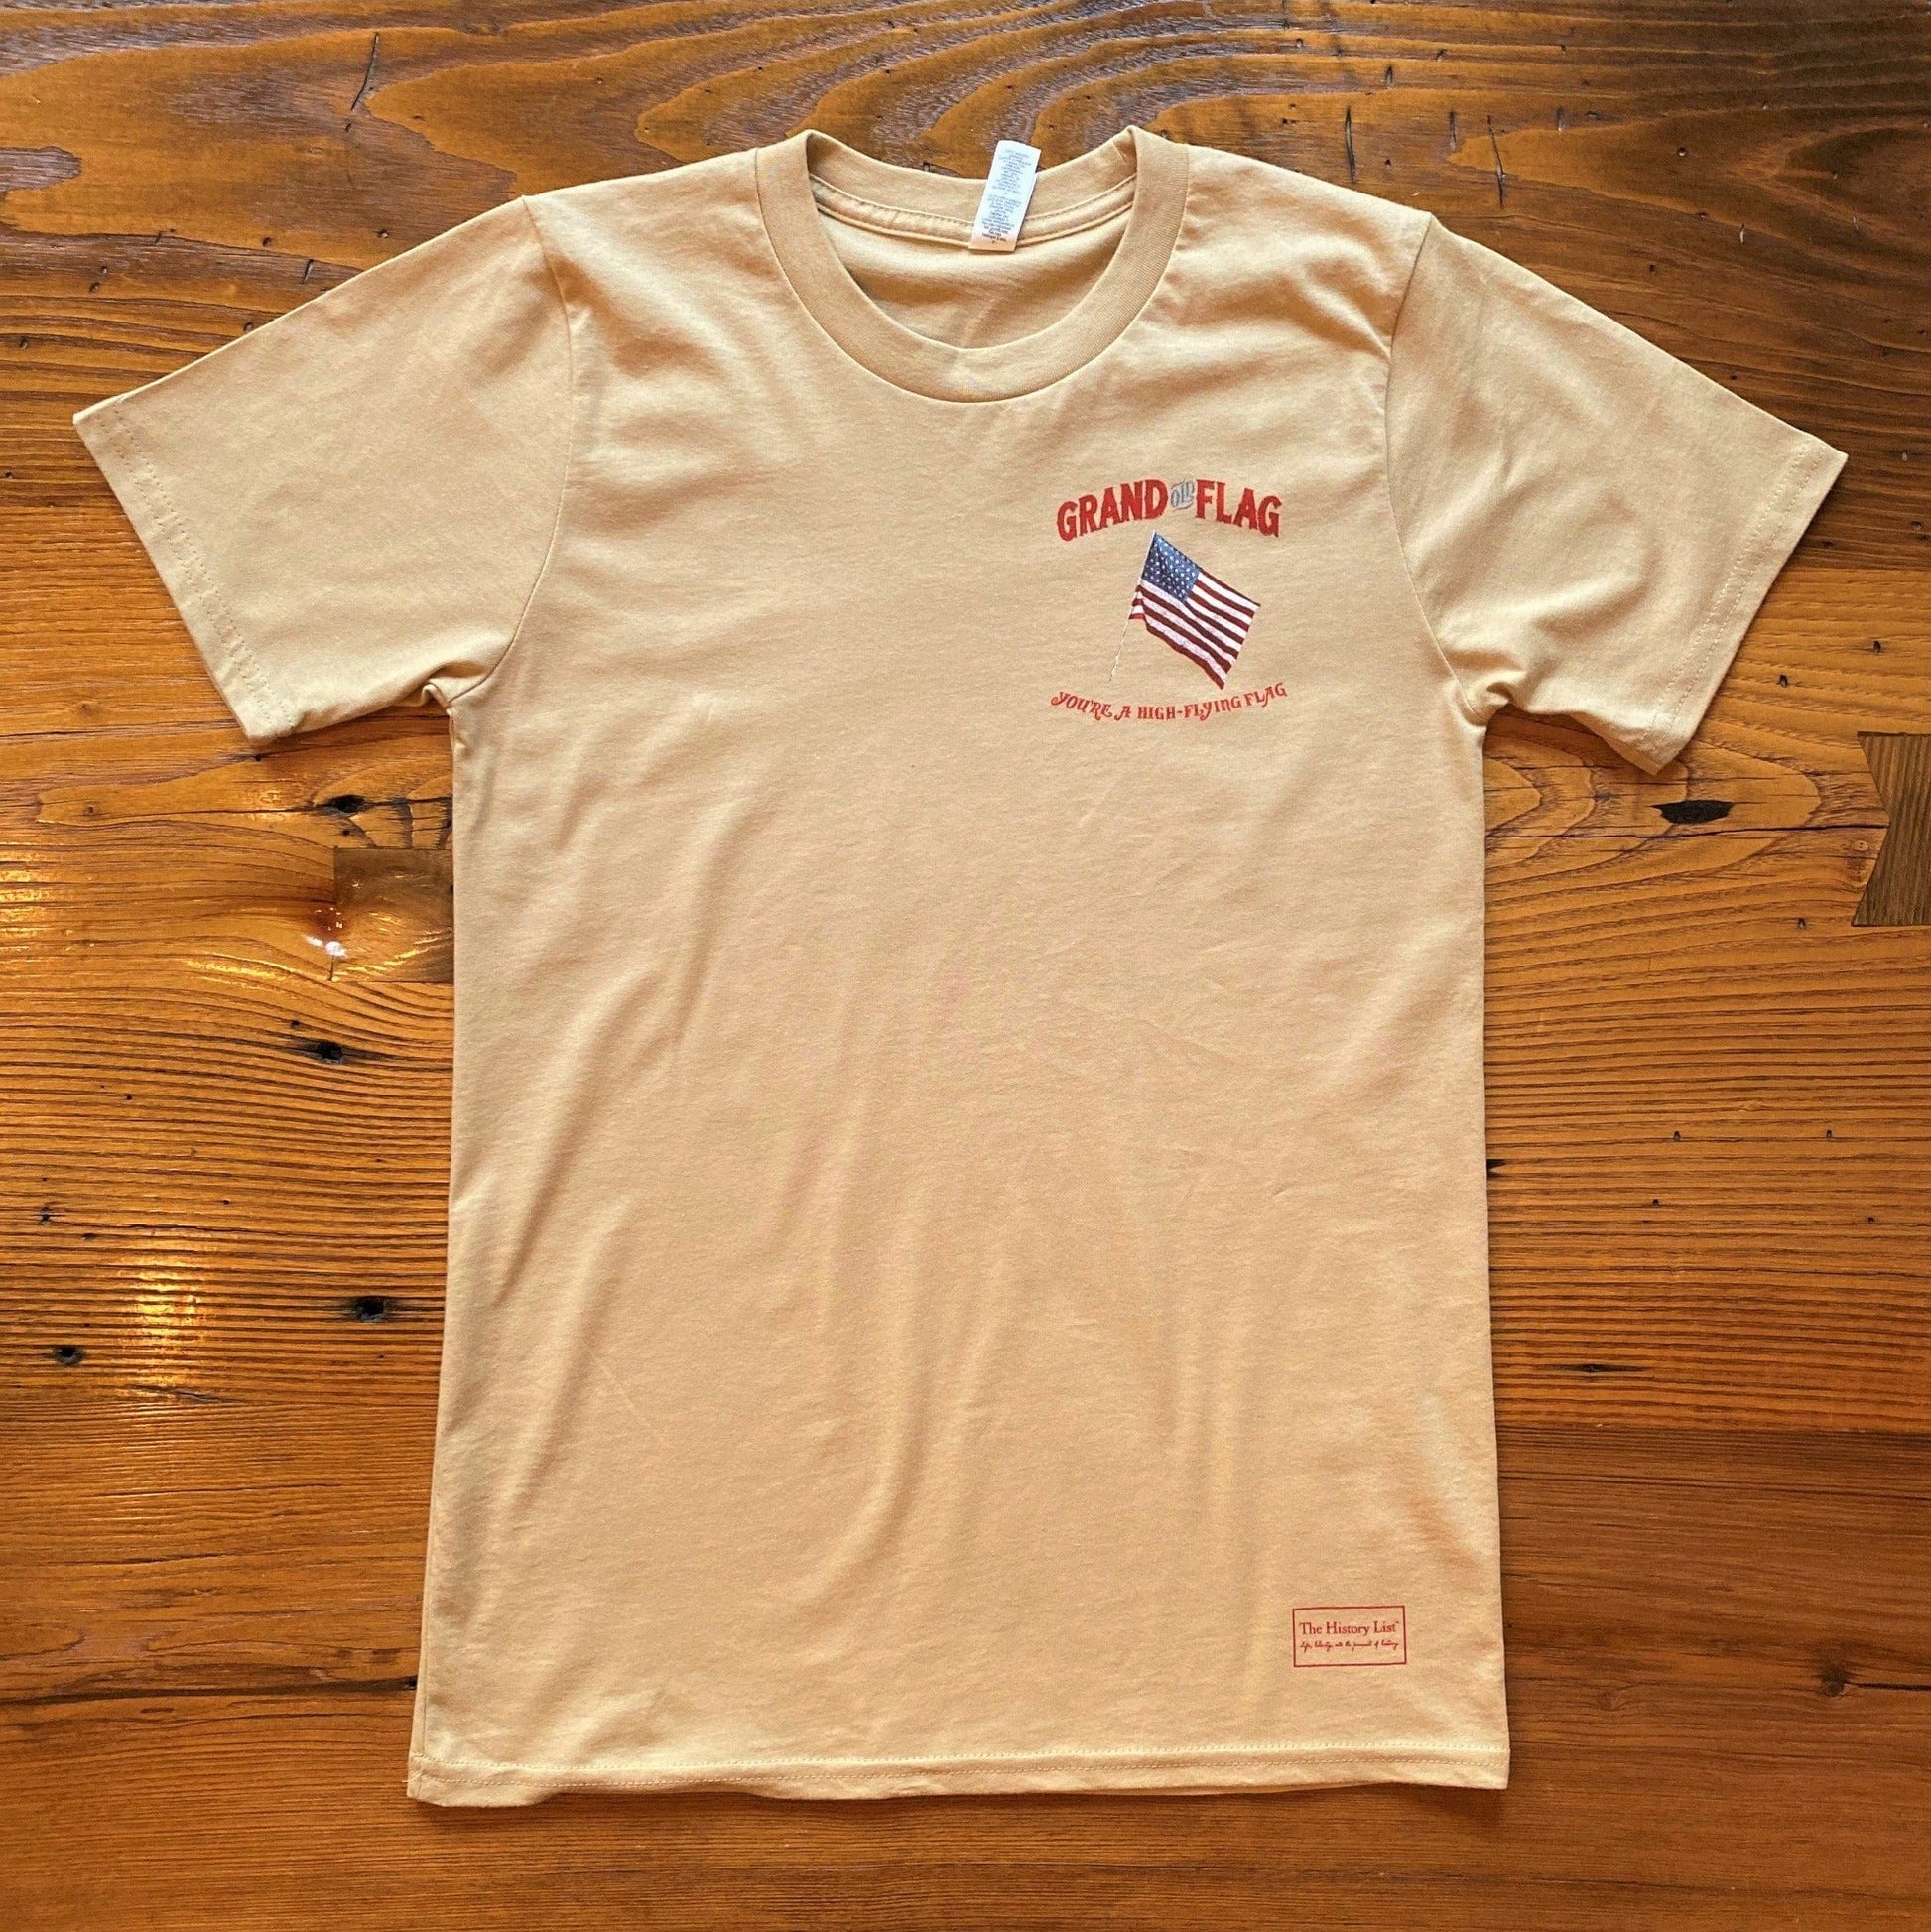 "Grand Old Flag" Shirt Sand color front design from the history list store